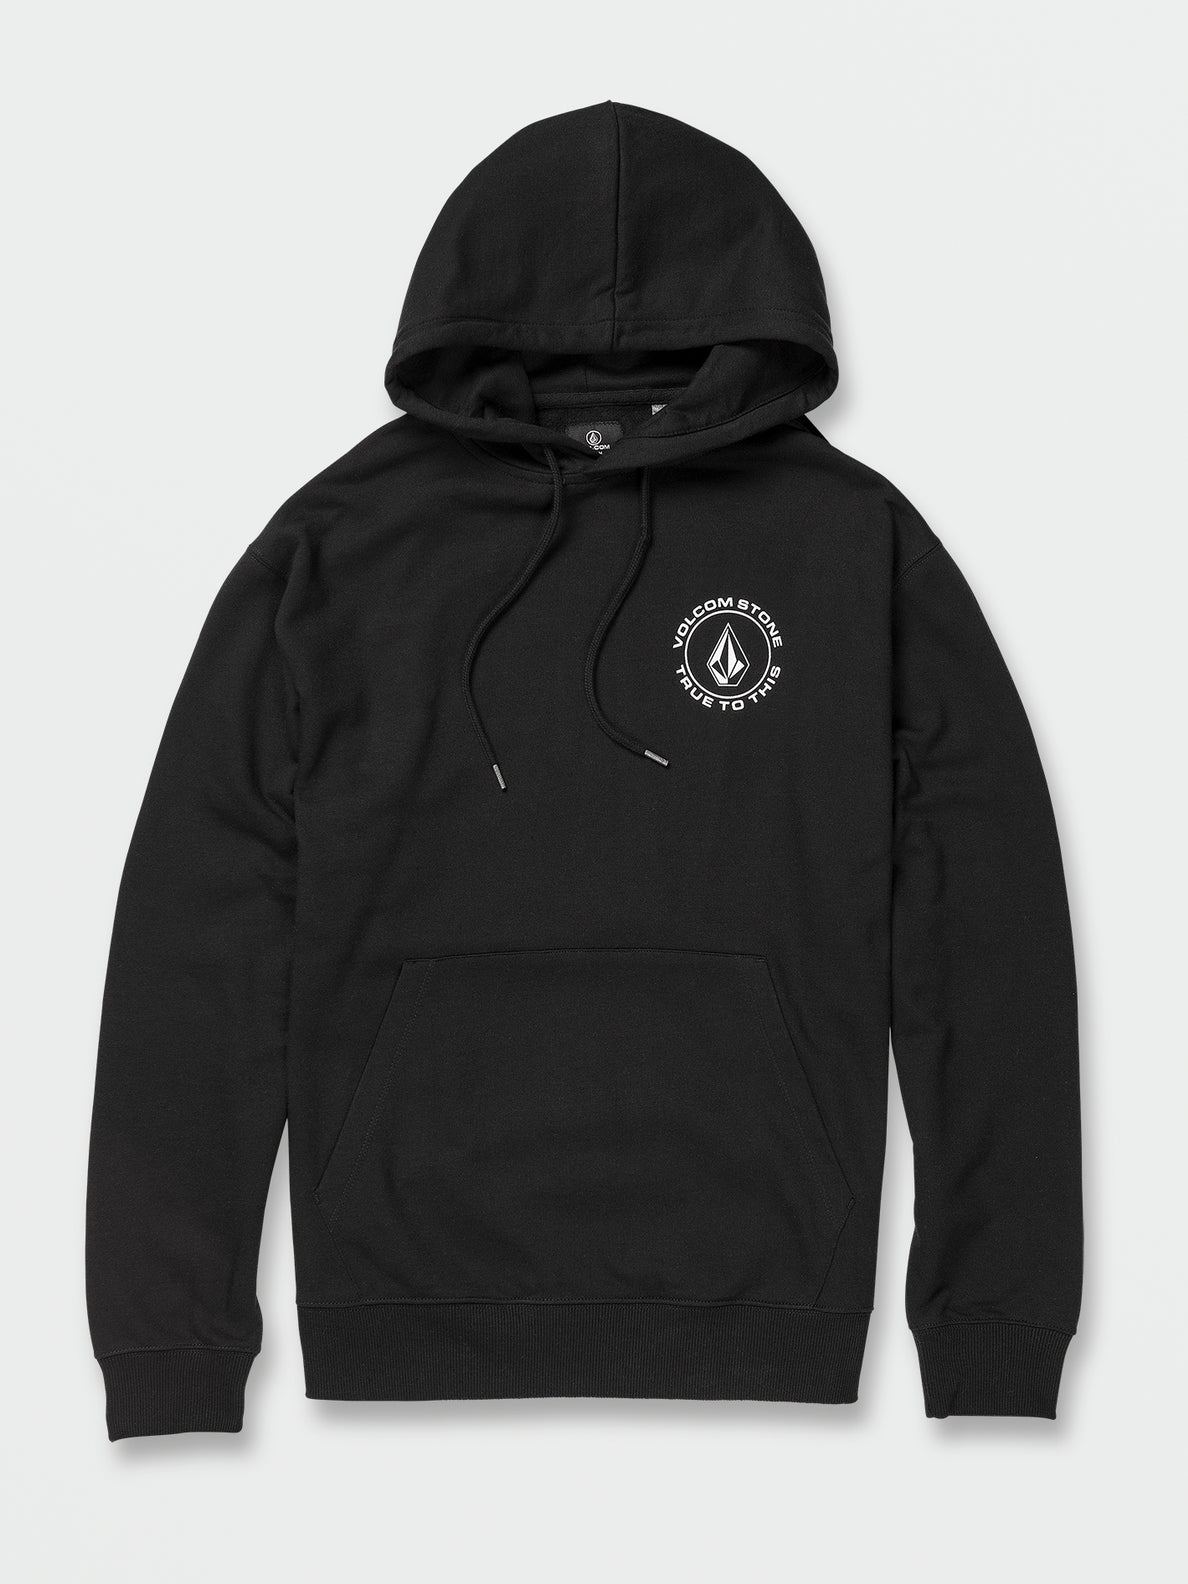 Black Friday Pullover Hoodie - Black (A4142203_BLK) [F]